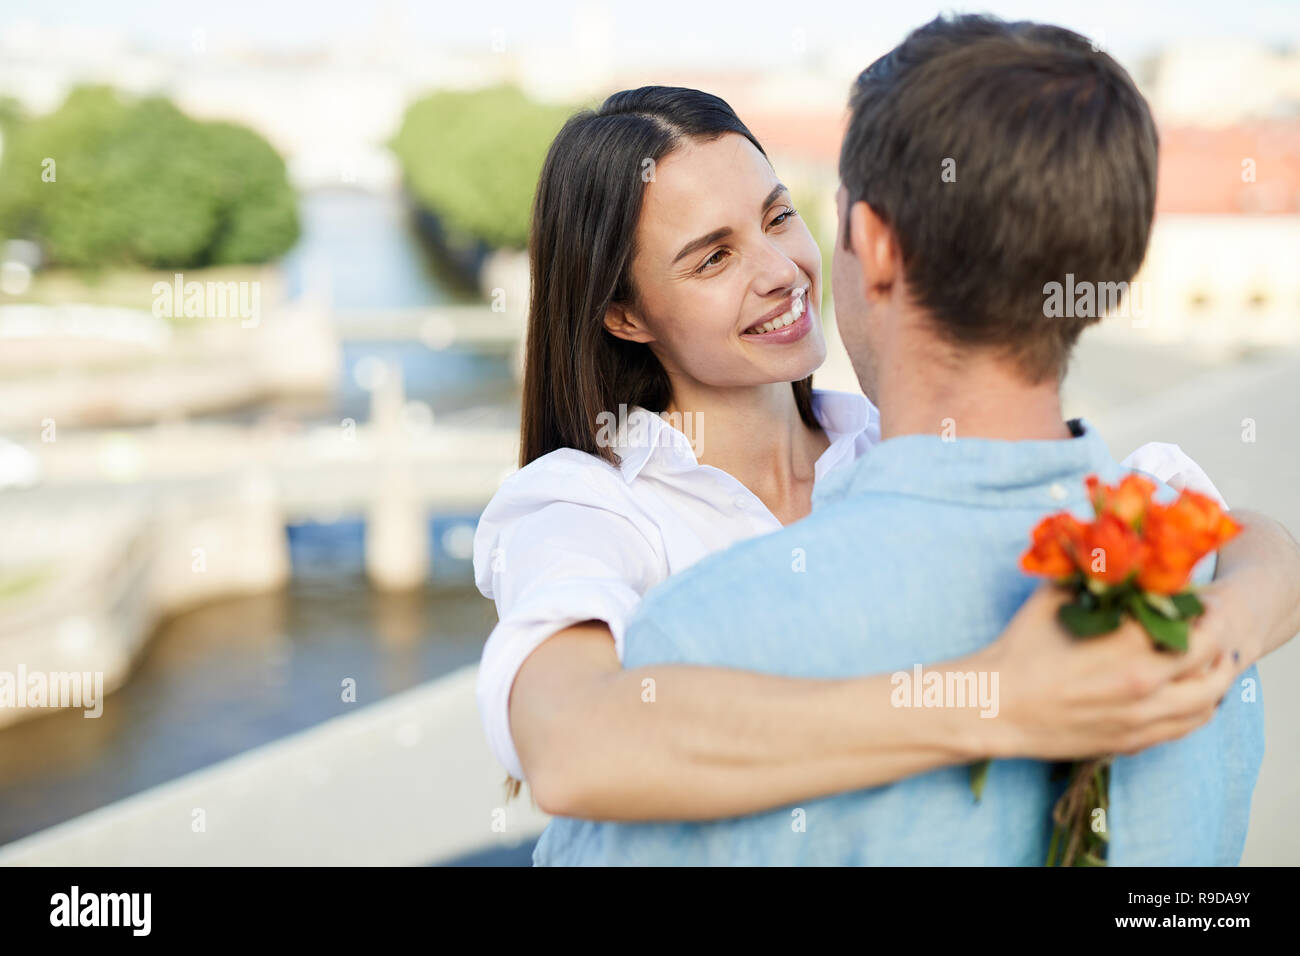 Affectionate girl looking at boyfriend Stock Photo